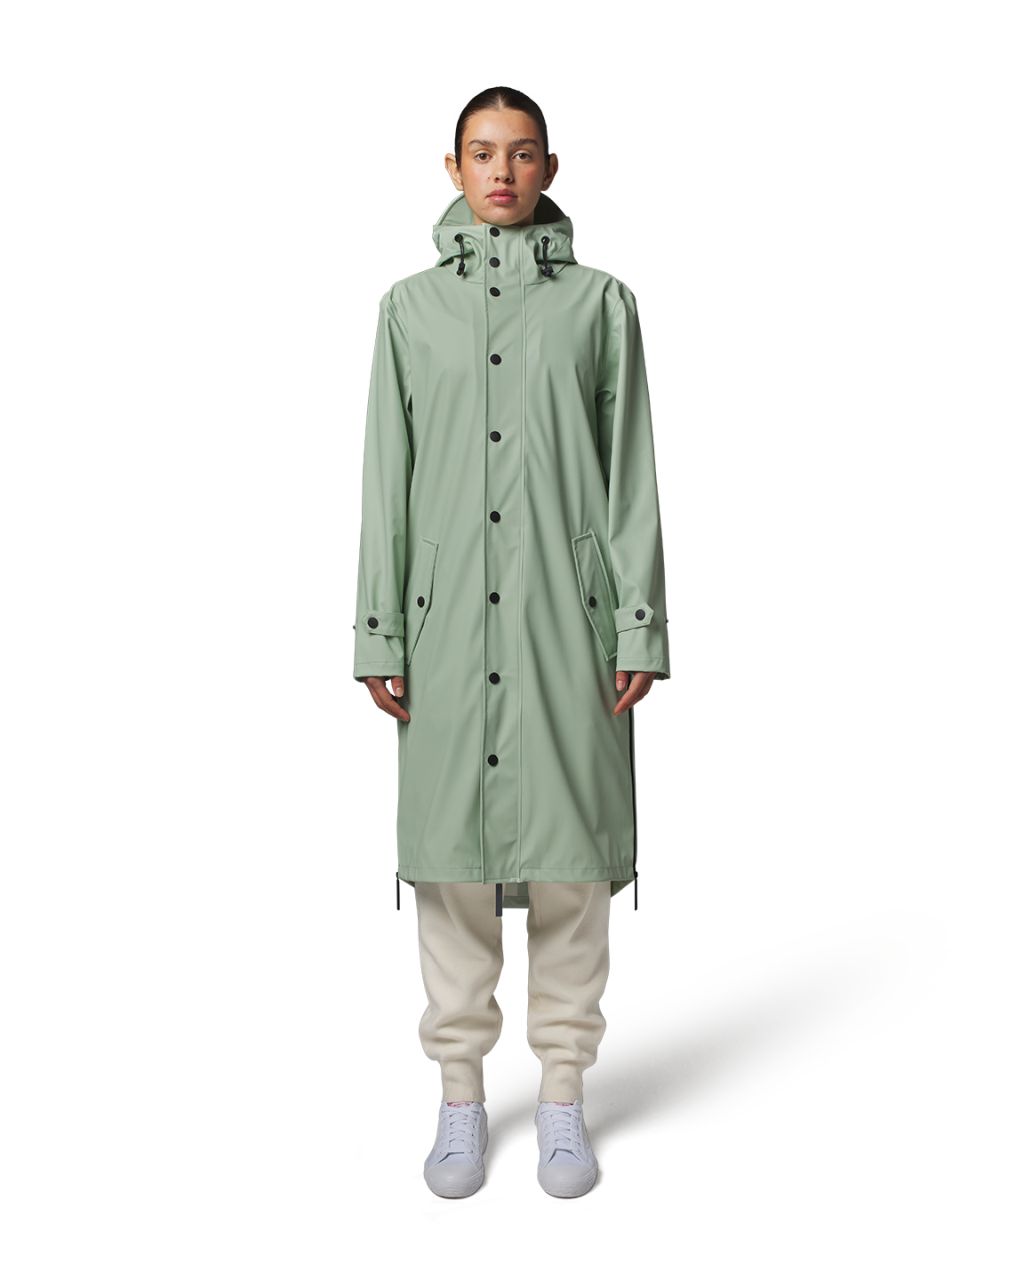 Original raincoat made from 66 recycled PET bottles